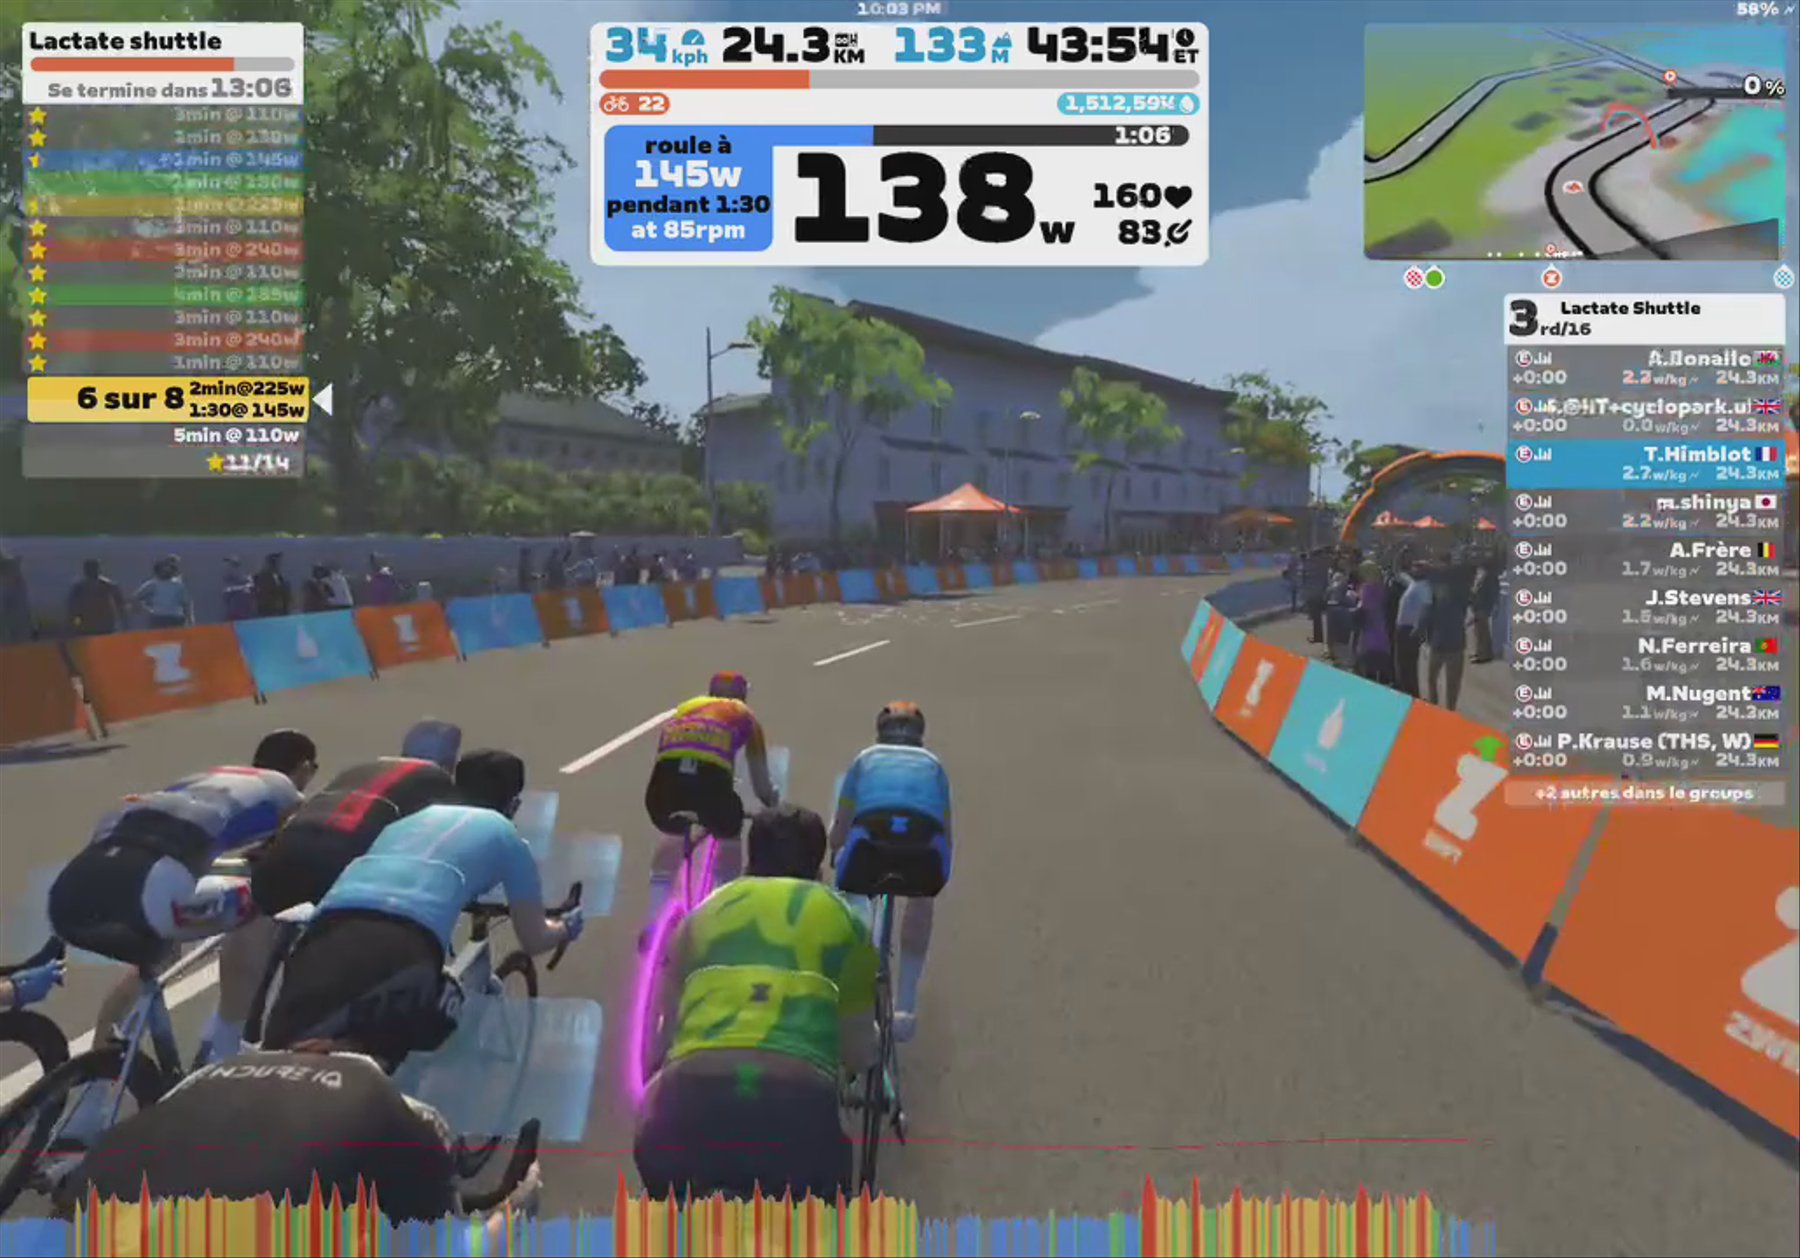 Zwift - Group Workout: Lactate Shuttle (E) on Douce France in France